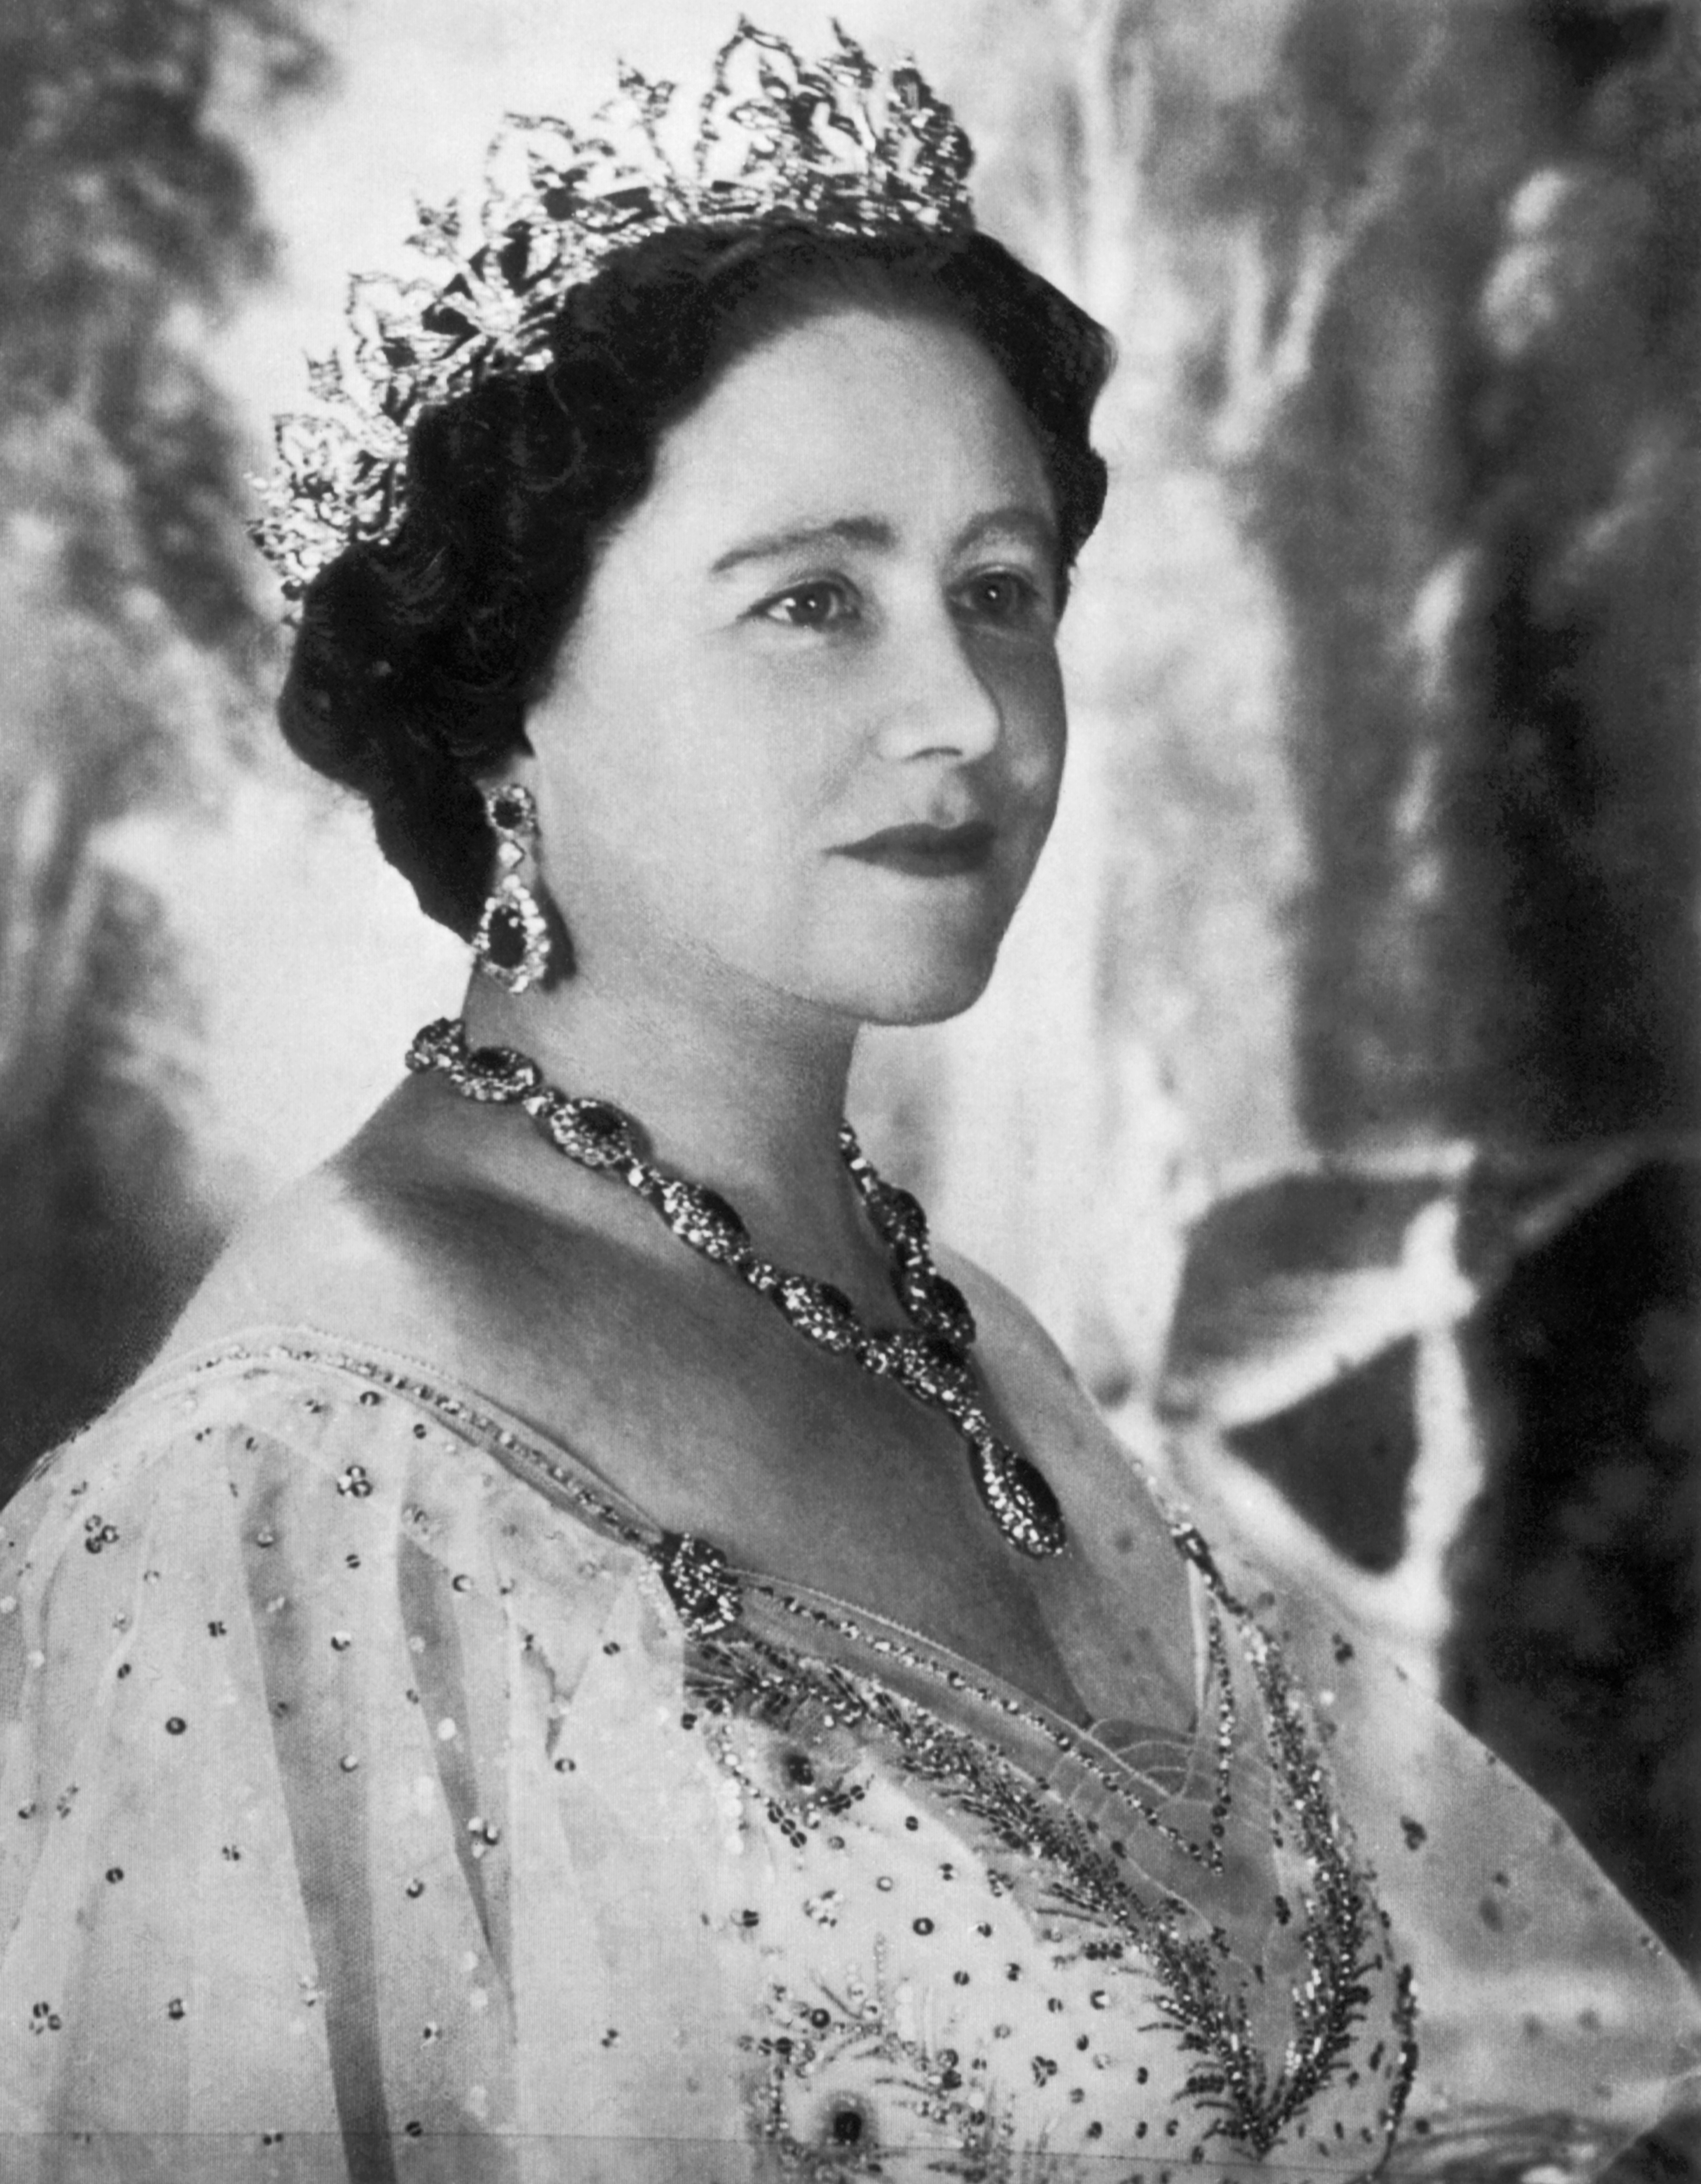 A portrait of the Queen Mother, 1950 | Source: Getty Images